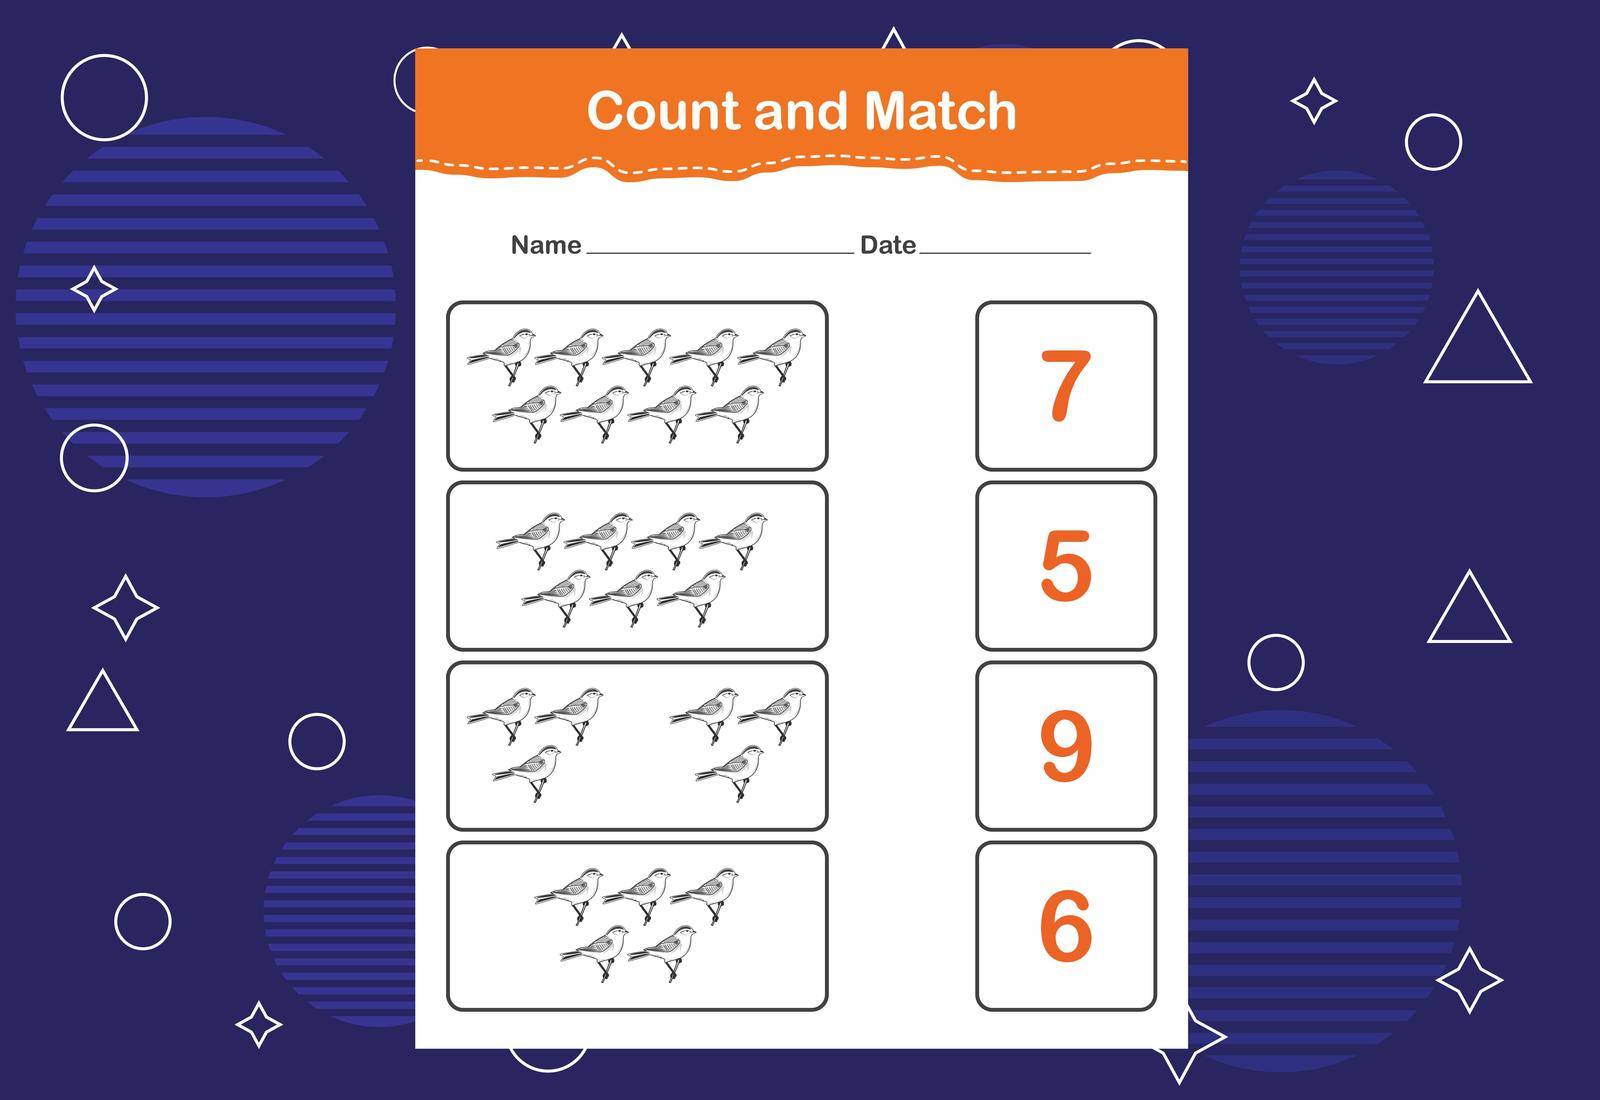 Count and match with the correct number. Count how many birds and choose the correct number